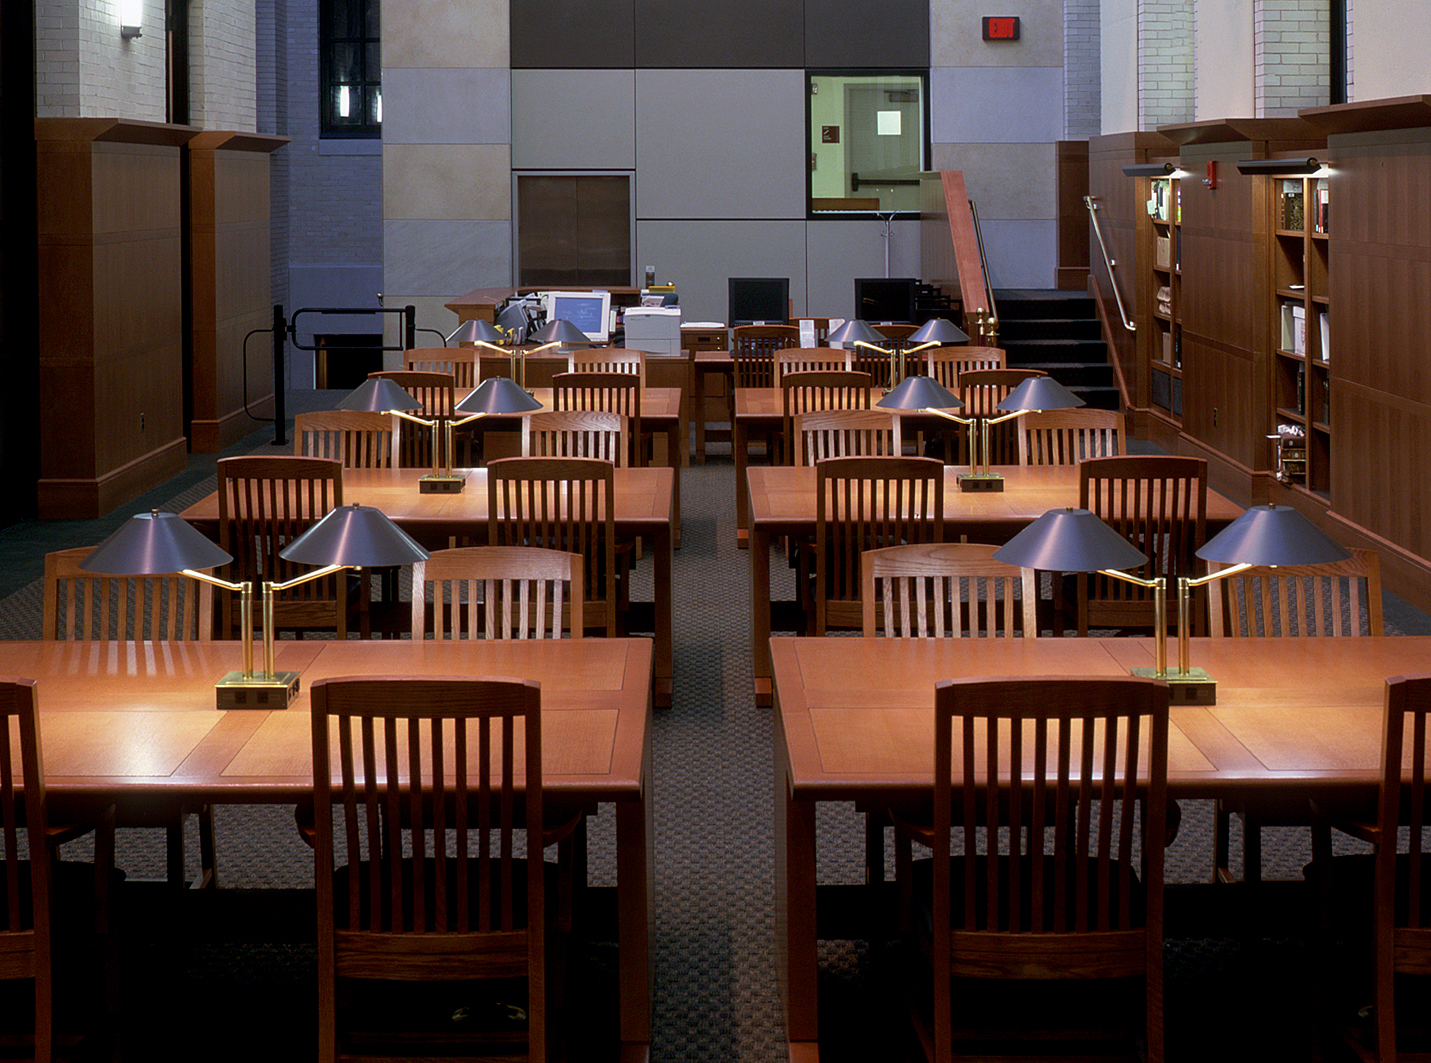 MRW built these work tables for the Widener Library at Harvard. The warm wood paneling and the custom wood furniture are a perfect combination with the cooler grey walls